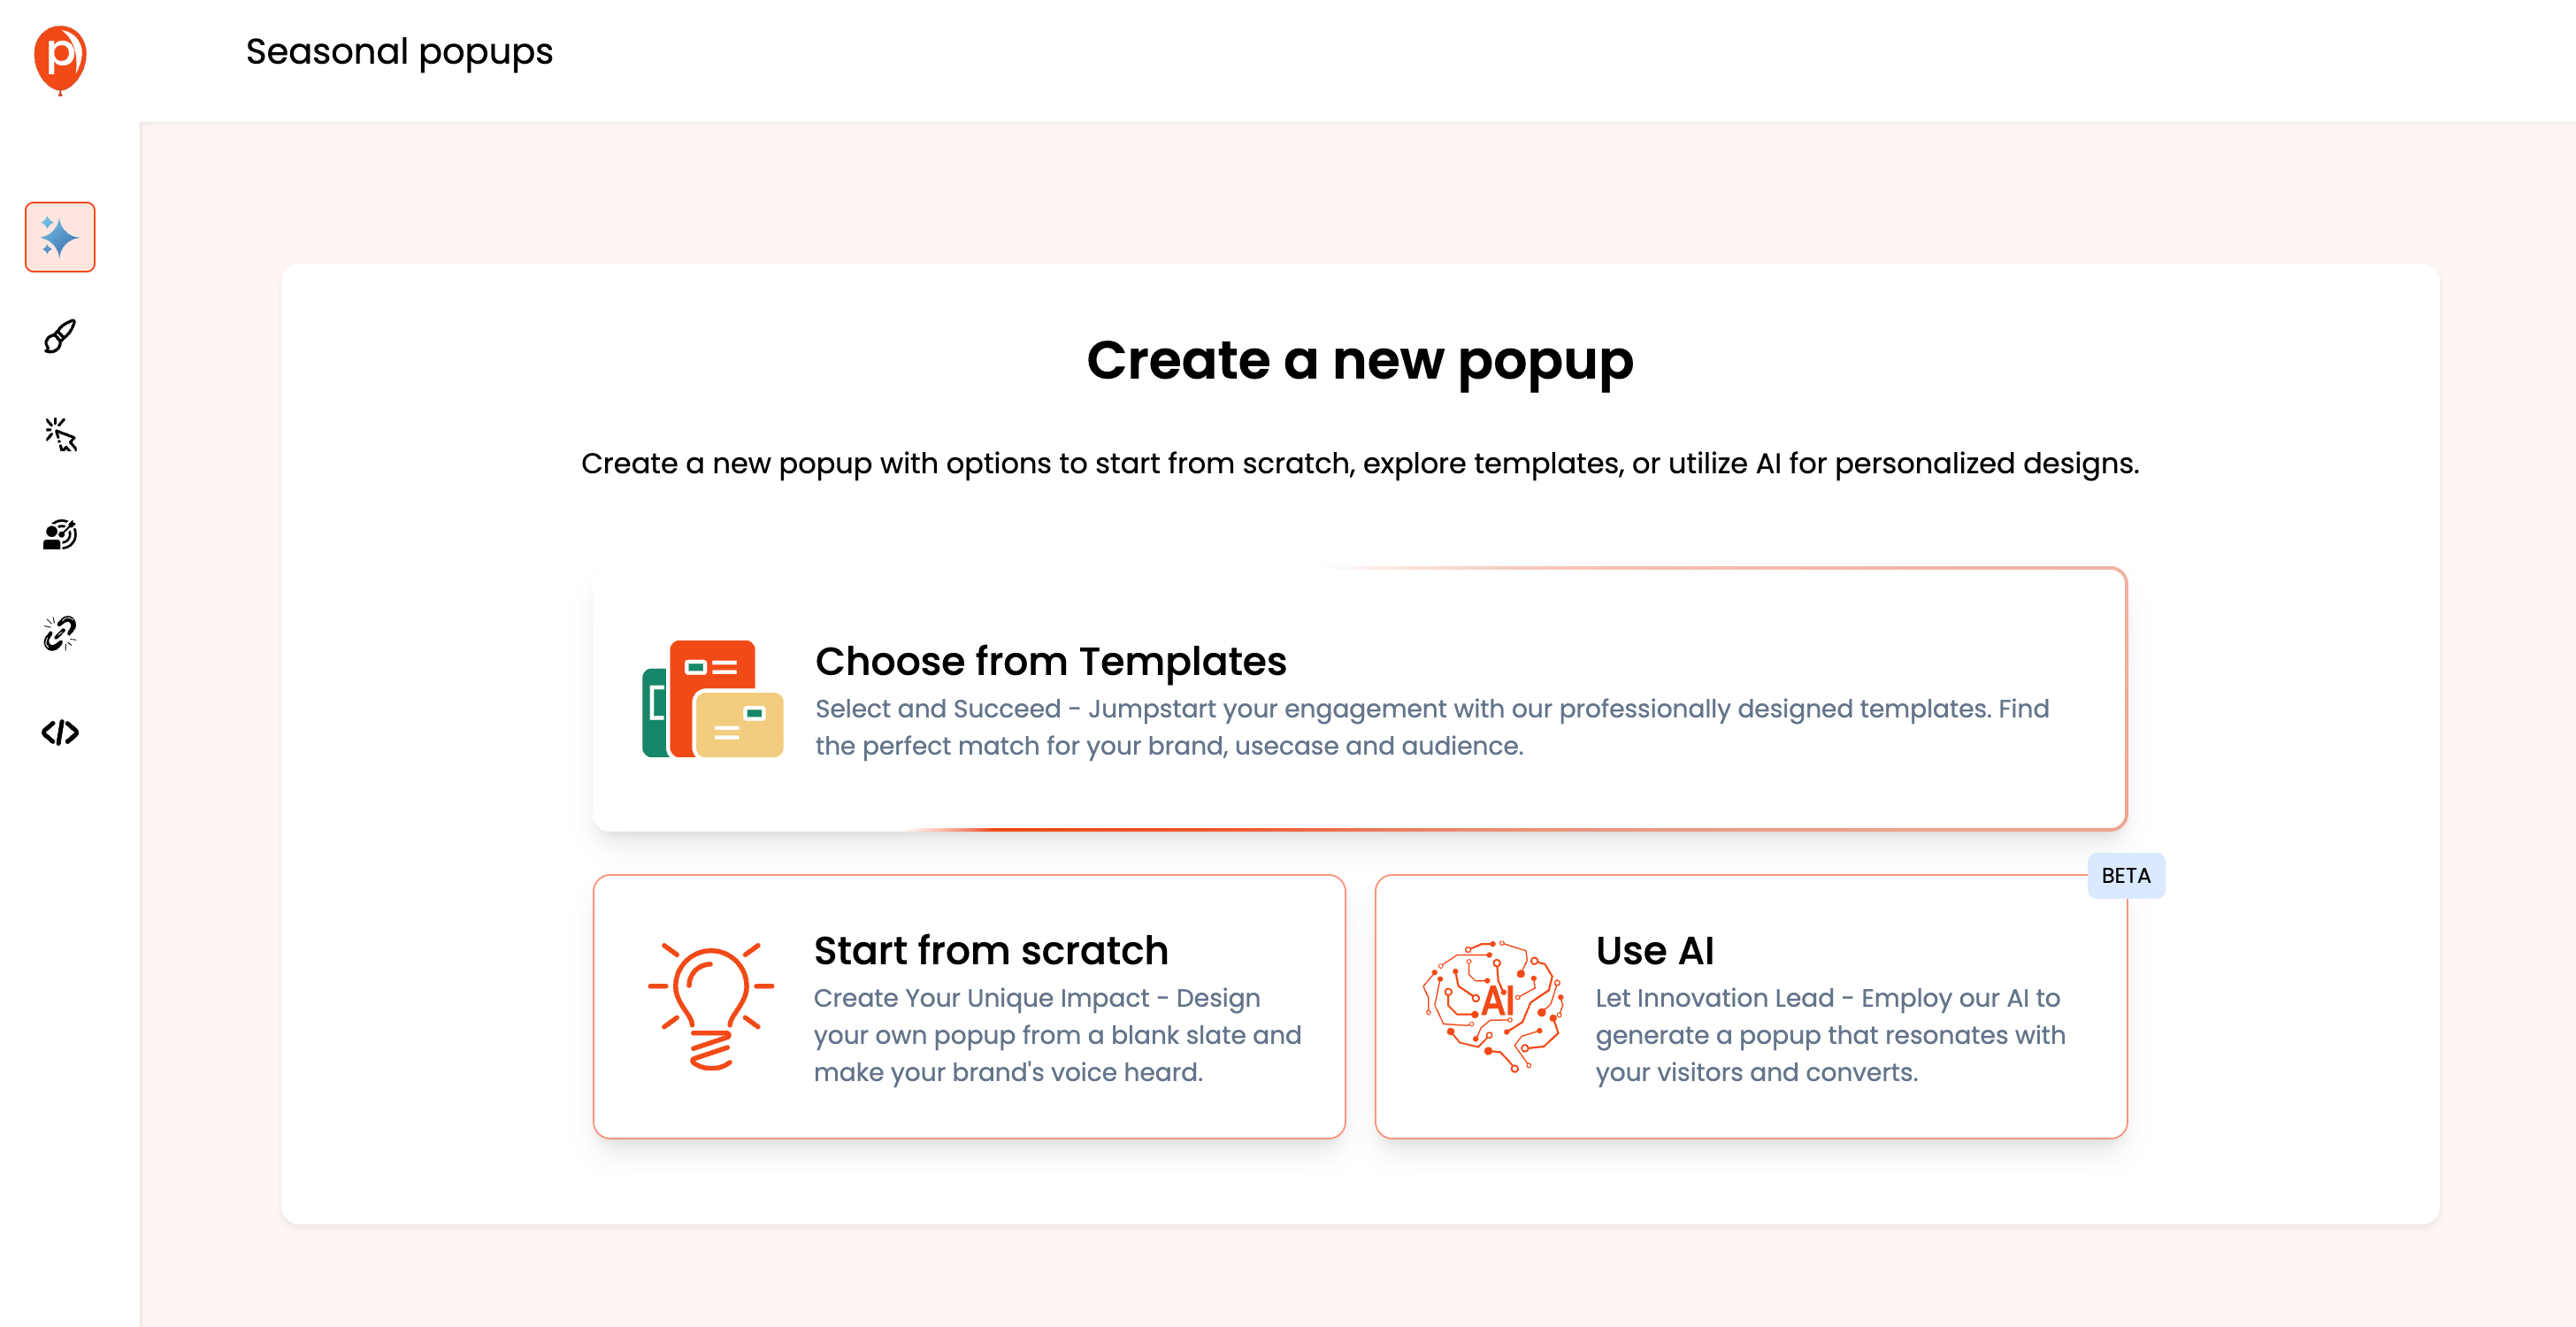 Choose from Templates or Start from Scratch